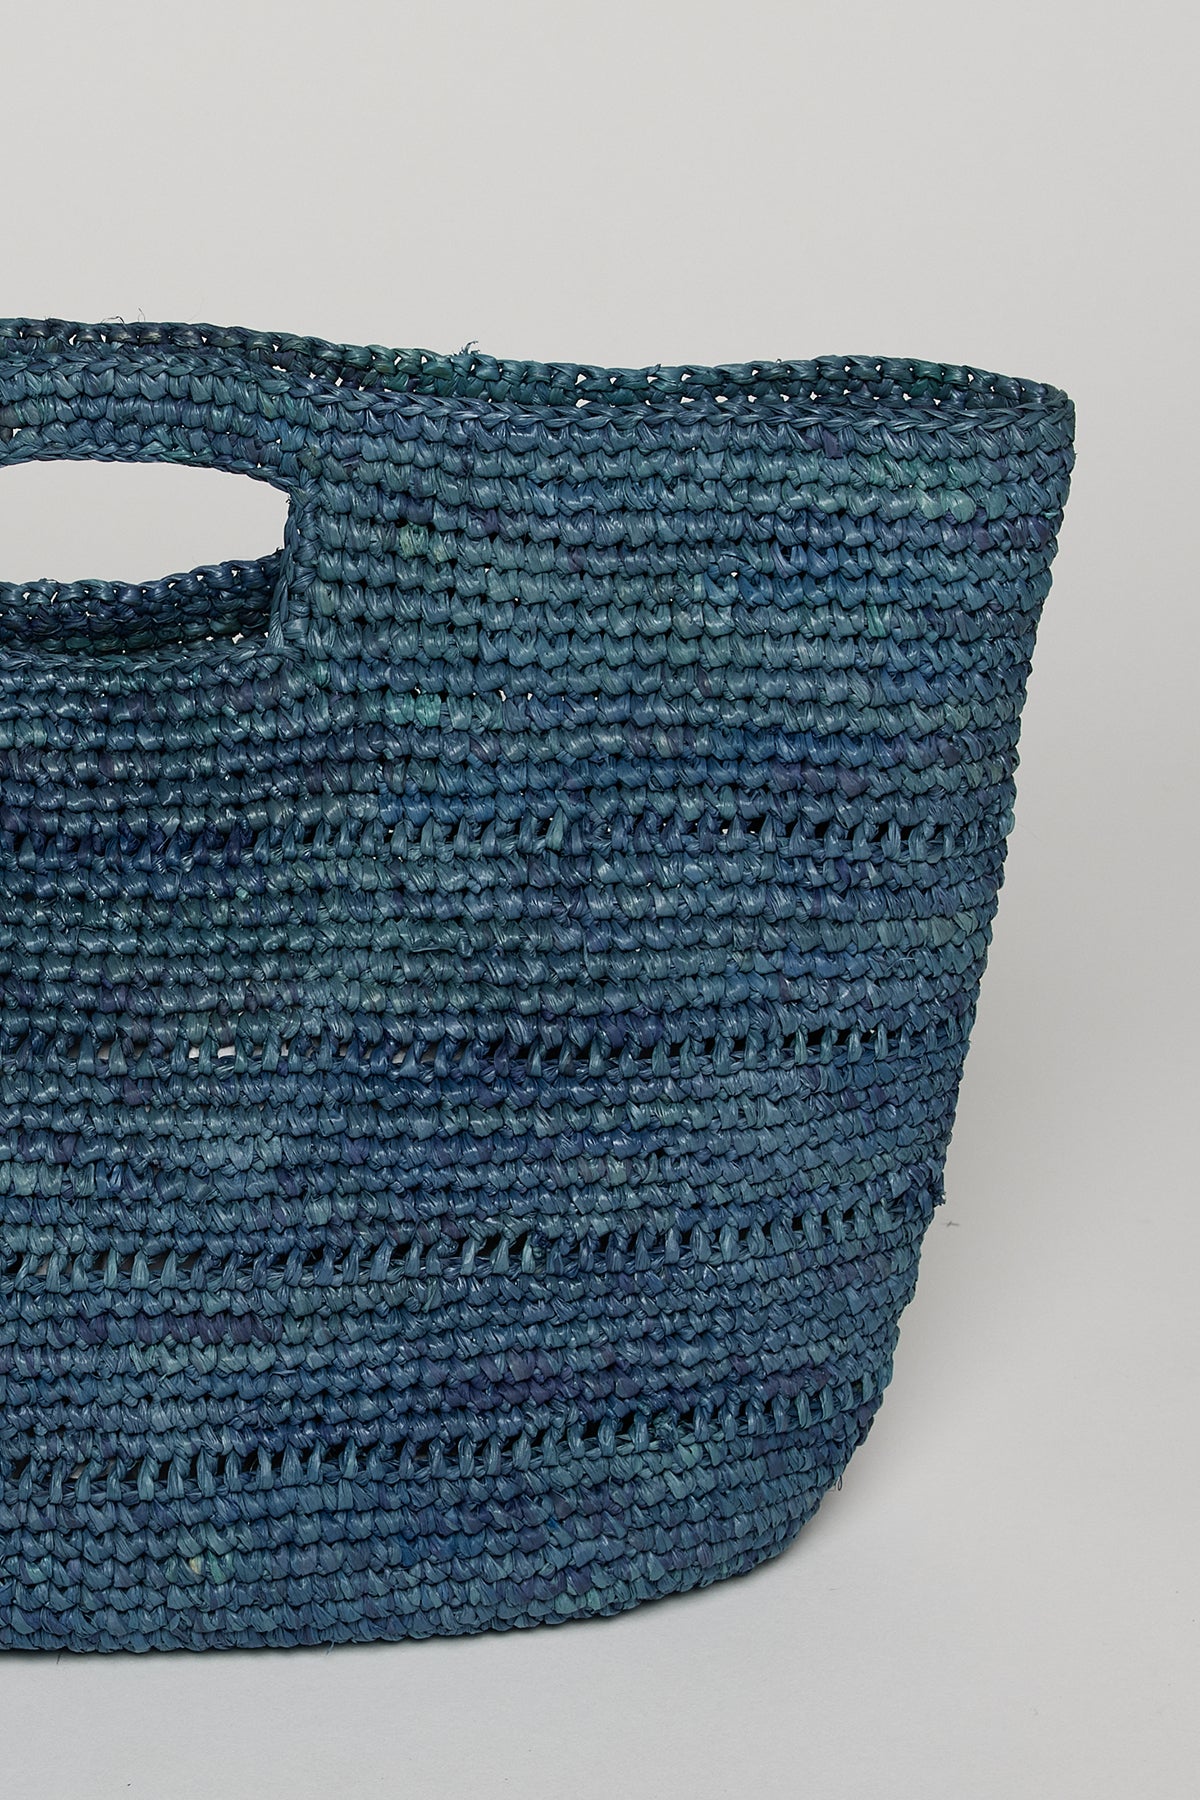 A close-up view of a textured, blue NAOMI HANDHELD STRAW BAG from Velvet by Graham & Spencer with a prominent handle.-36571449524417